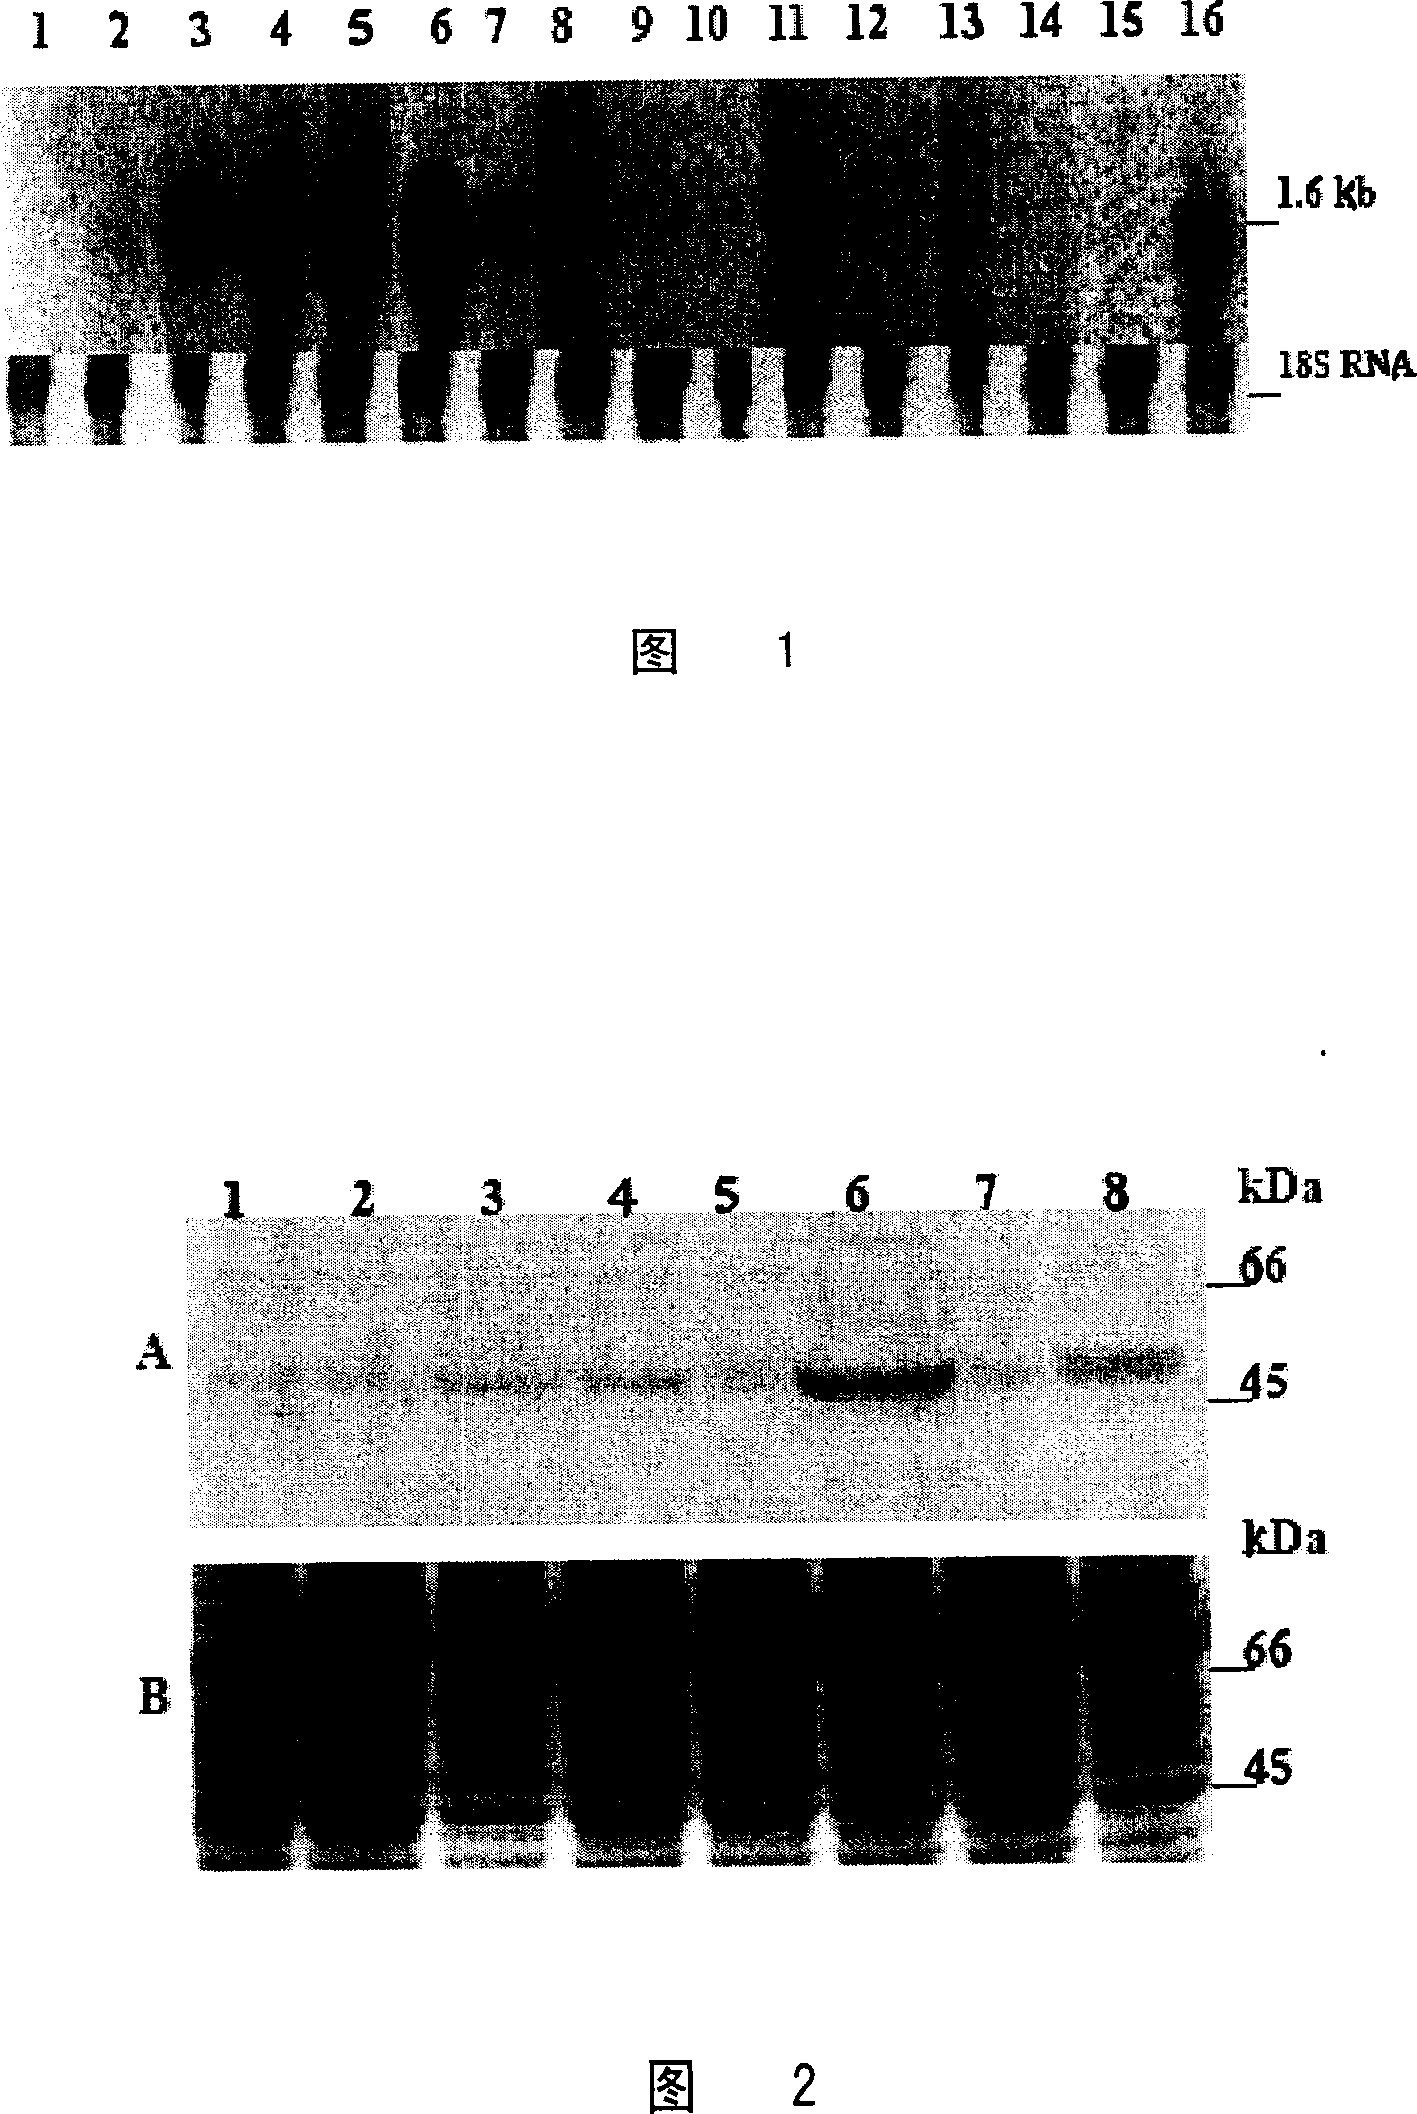 Function of E4BP4 gene inplantation course and use thereof